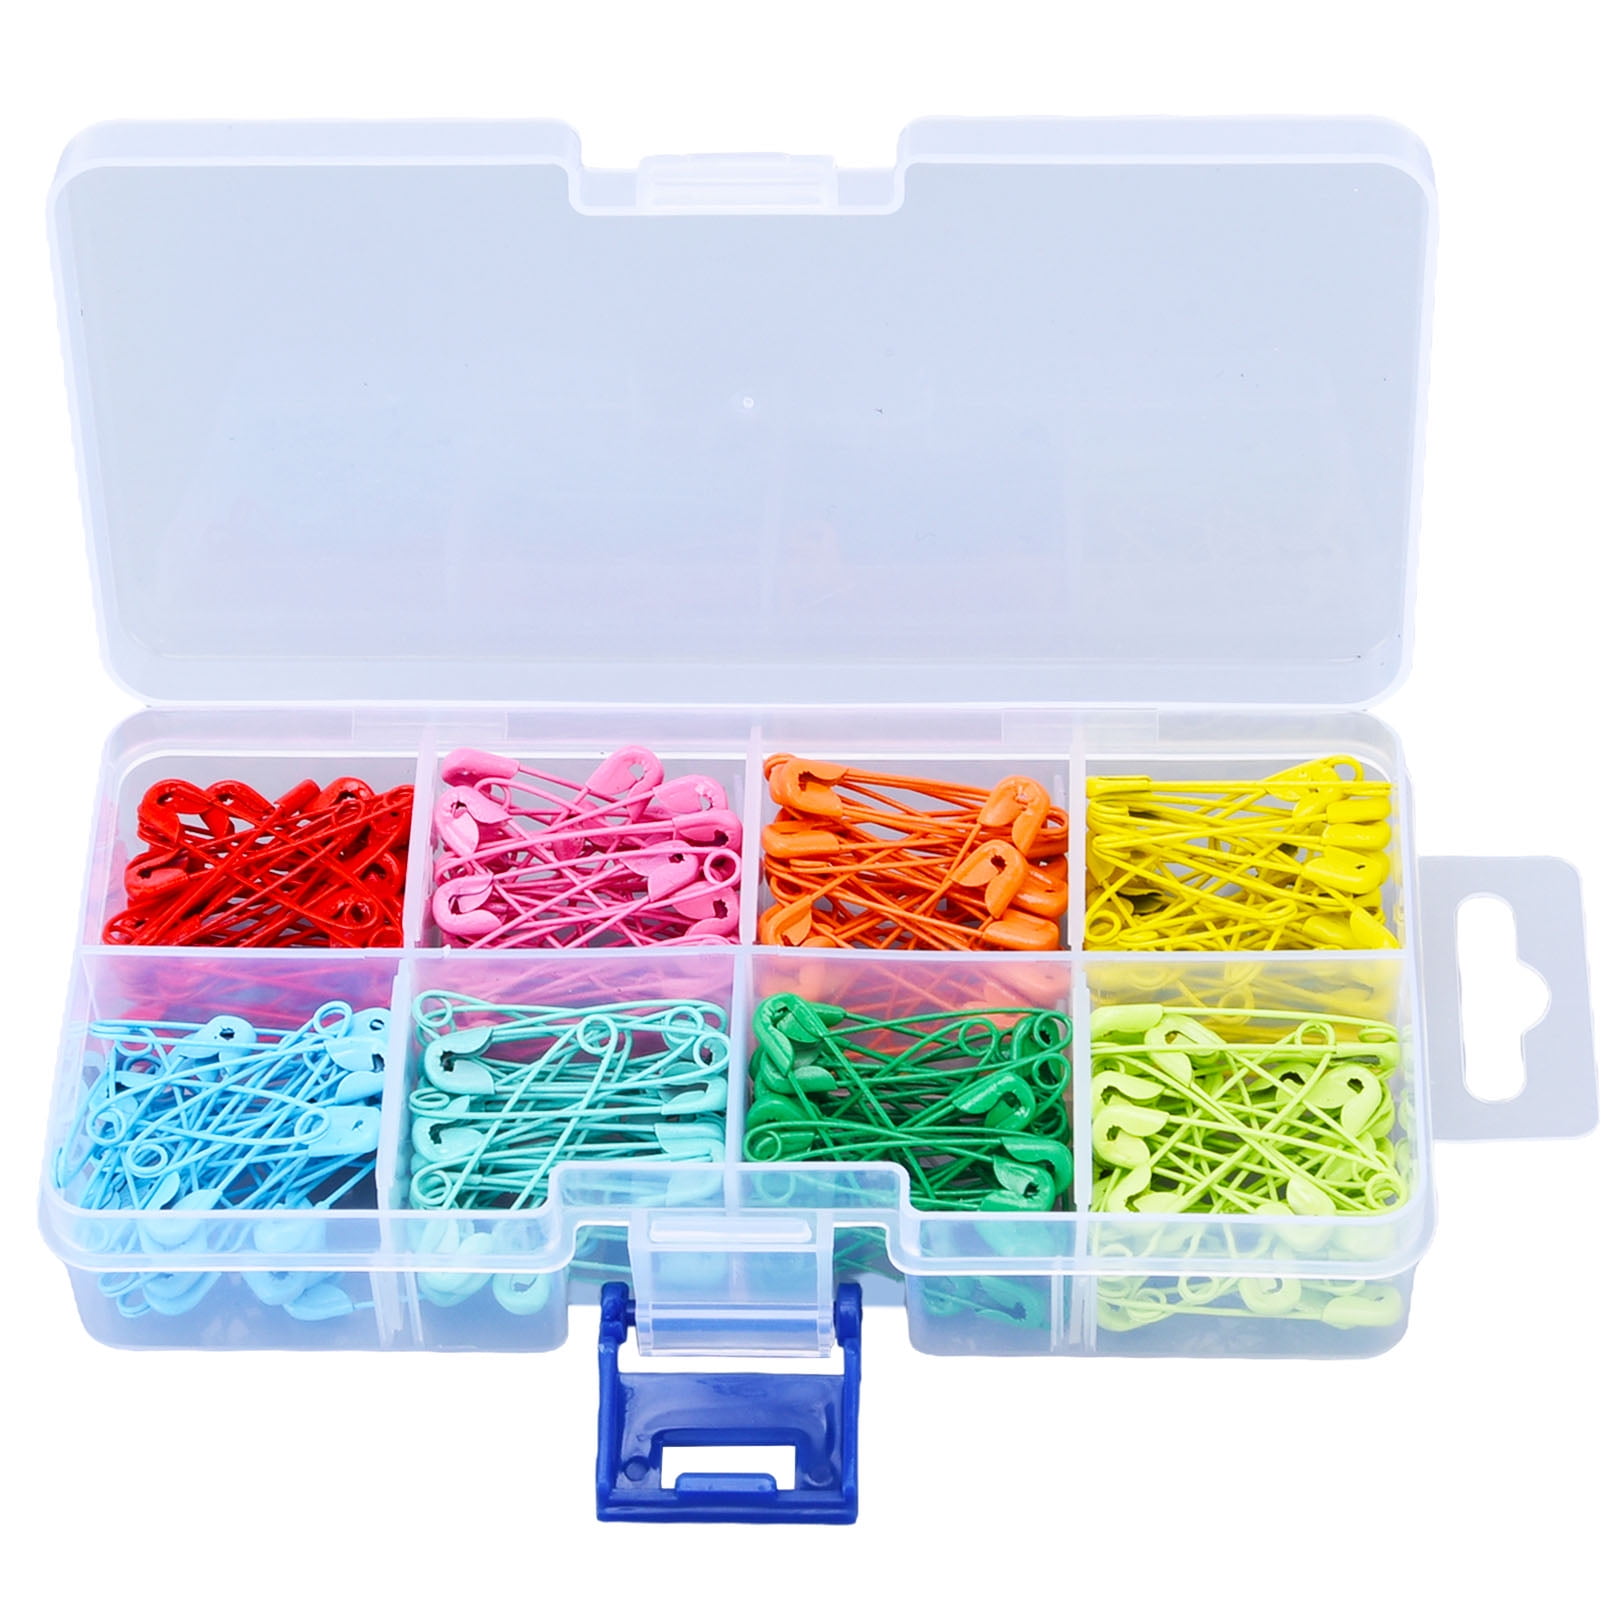 Amonsee 240Pcs Colorful Safety Pins 32mm Stainless Steel Safety Pins Mini  DIY Sewing Quilting Tools,Multi Colored Safety Pins 